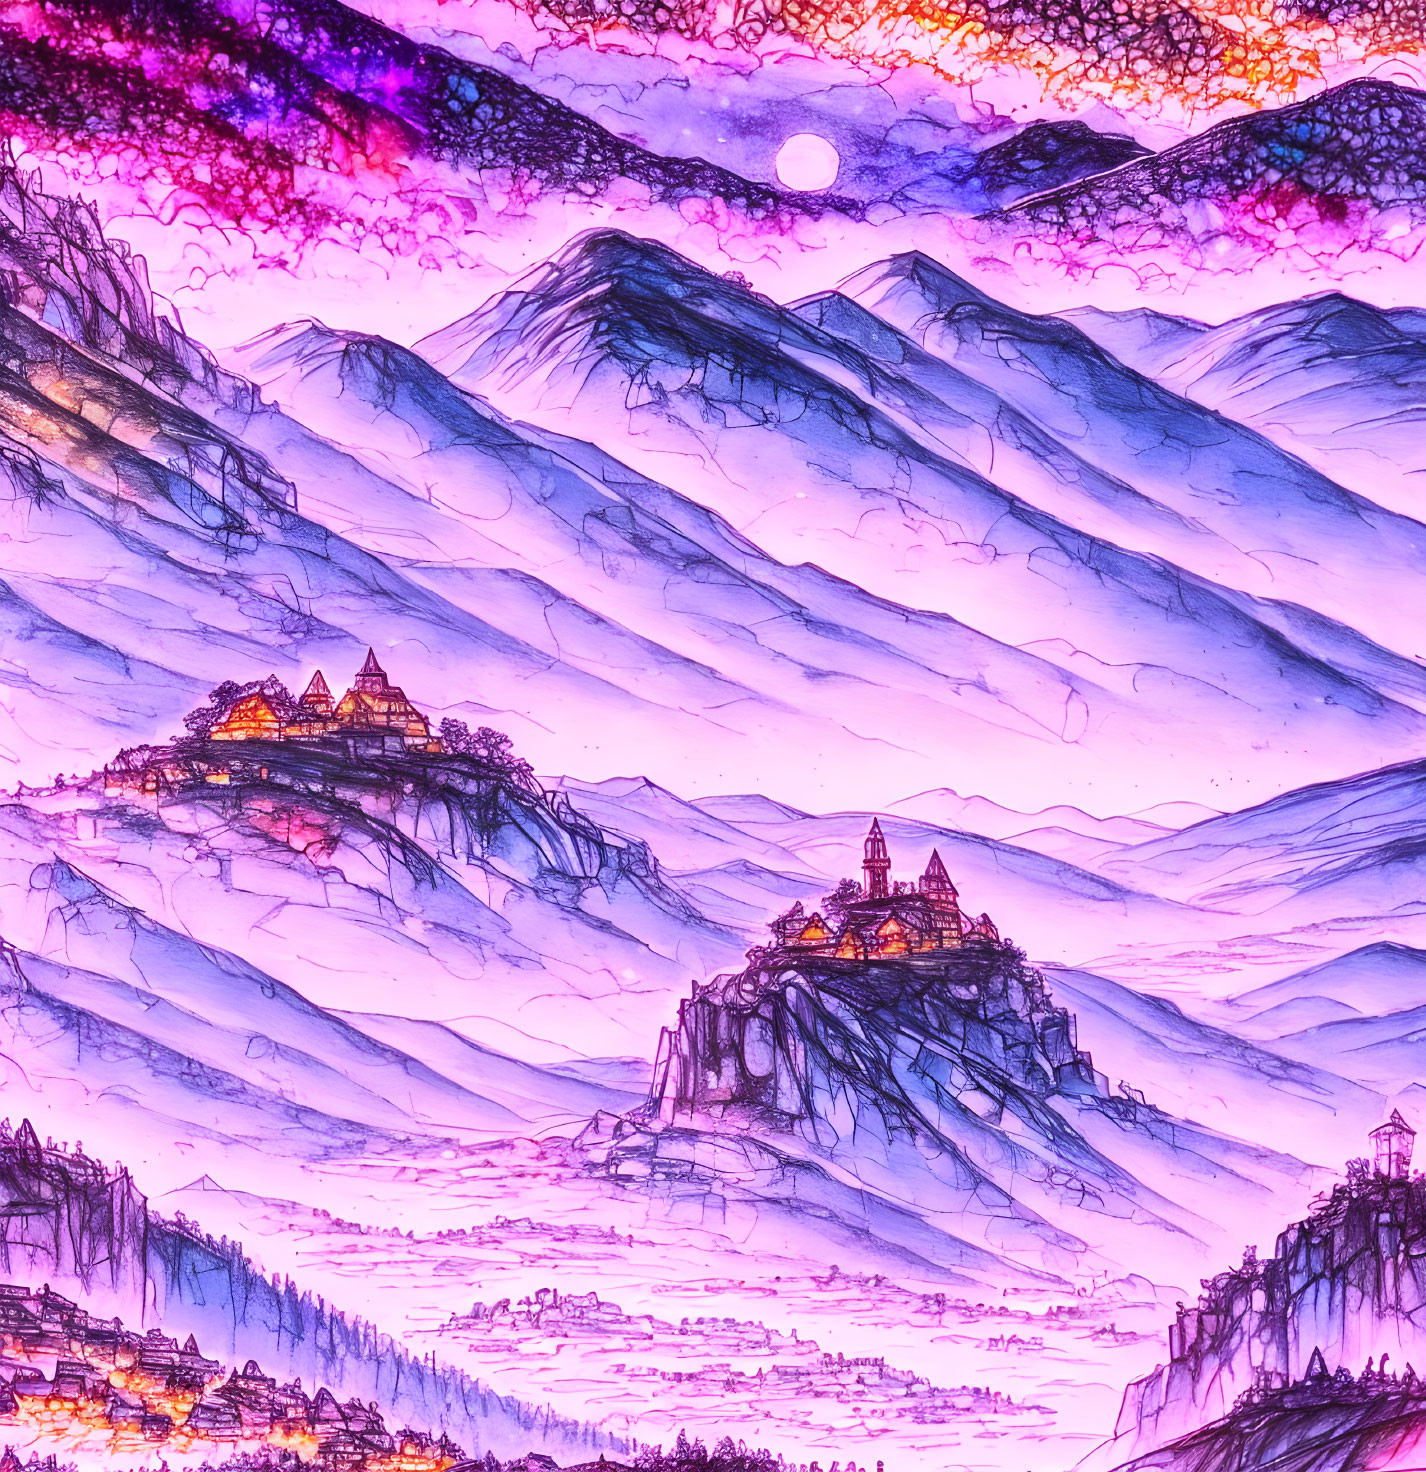 Fantasy landscape with purple and pink hues, mountains, castles, starry sky, full moon